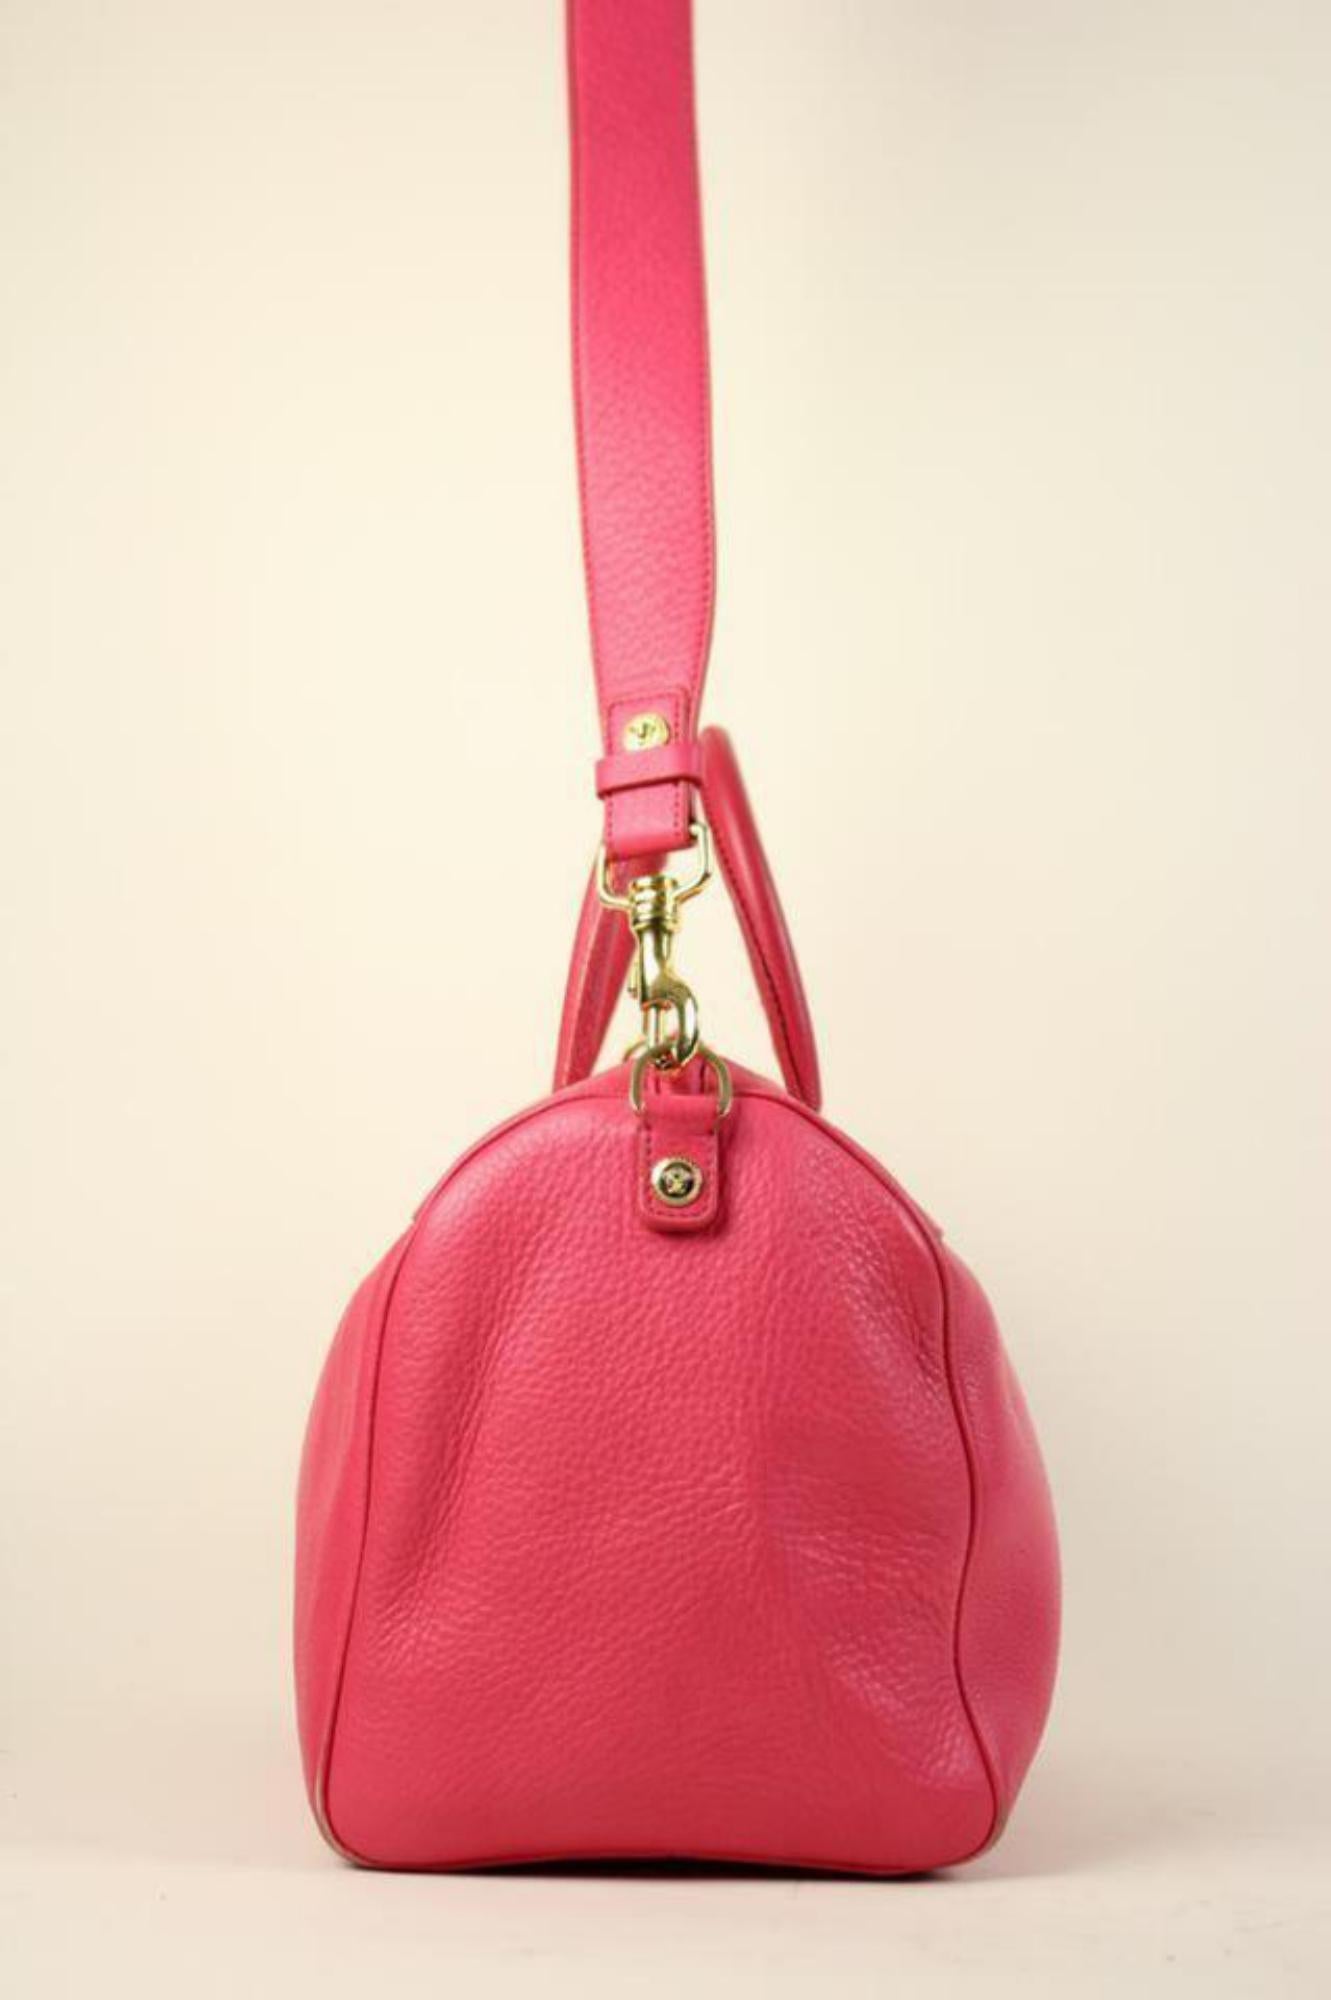 Versace Hot Pink Satchel Two Way Boston Satchel
This item will ship immediately!!
Previously owned.
Made In: Italy
Measurements: Length: 11.5